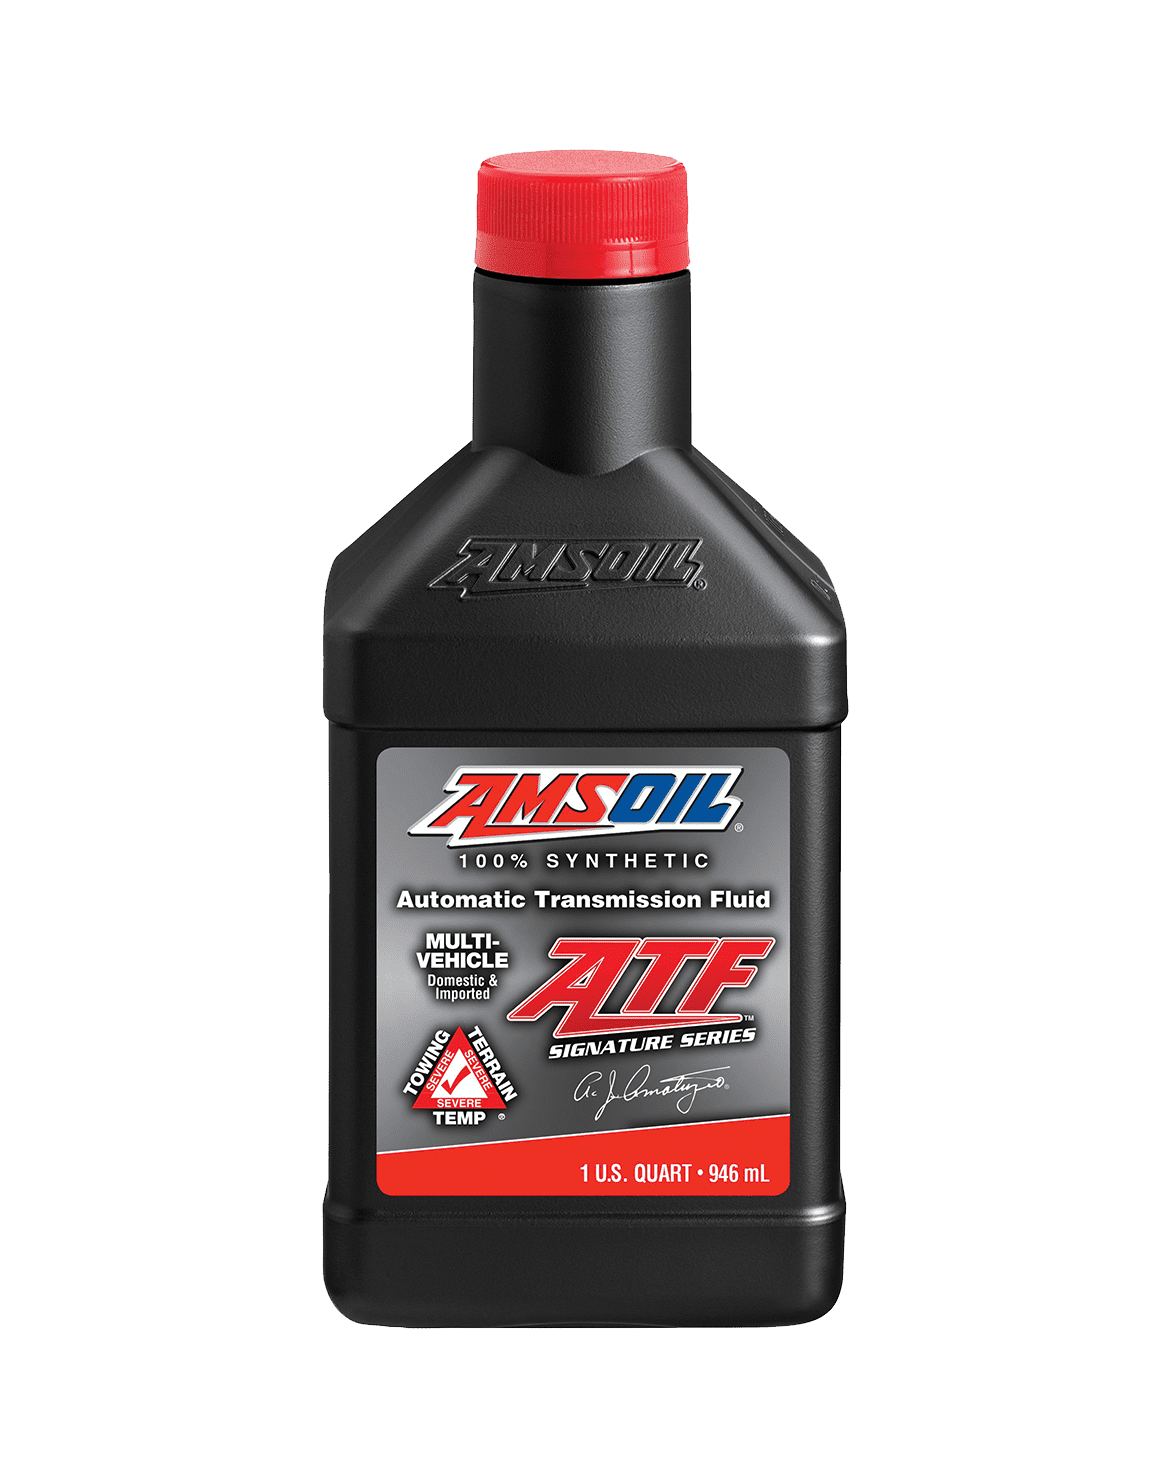 Amsoil-Synthetic-Multi-Vehicle-SS-ATF,-ATF1G